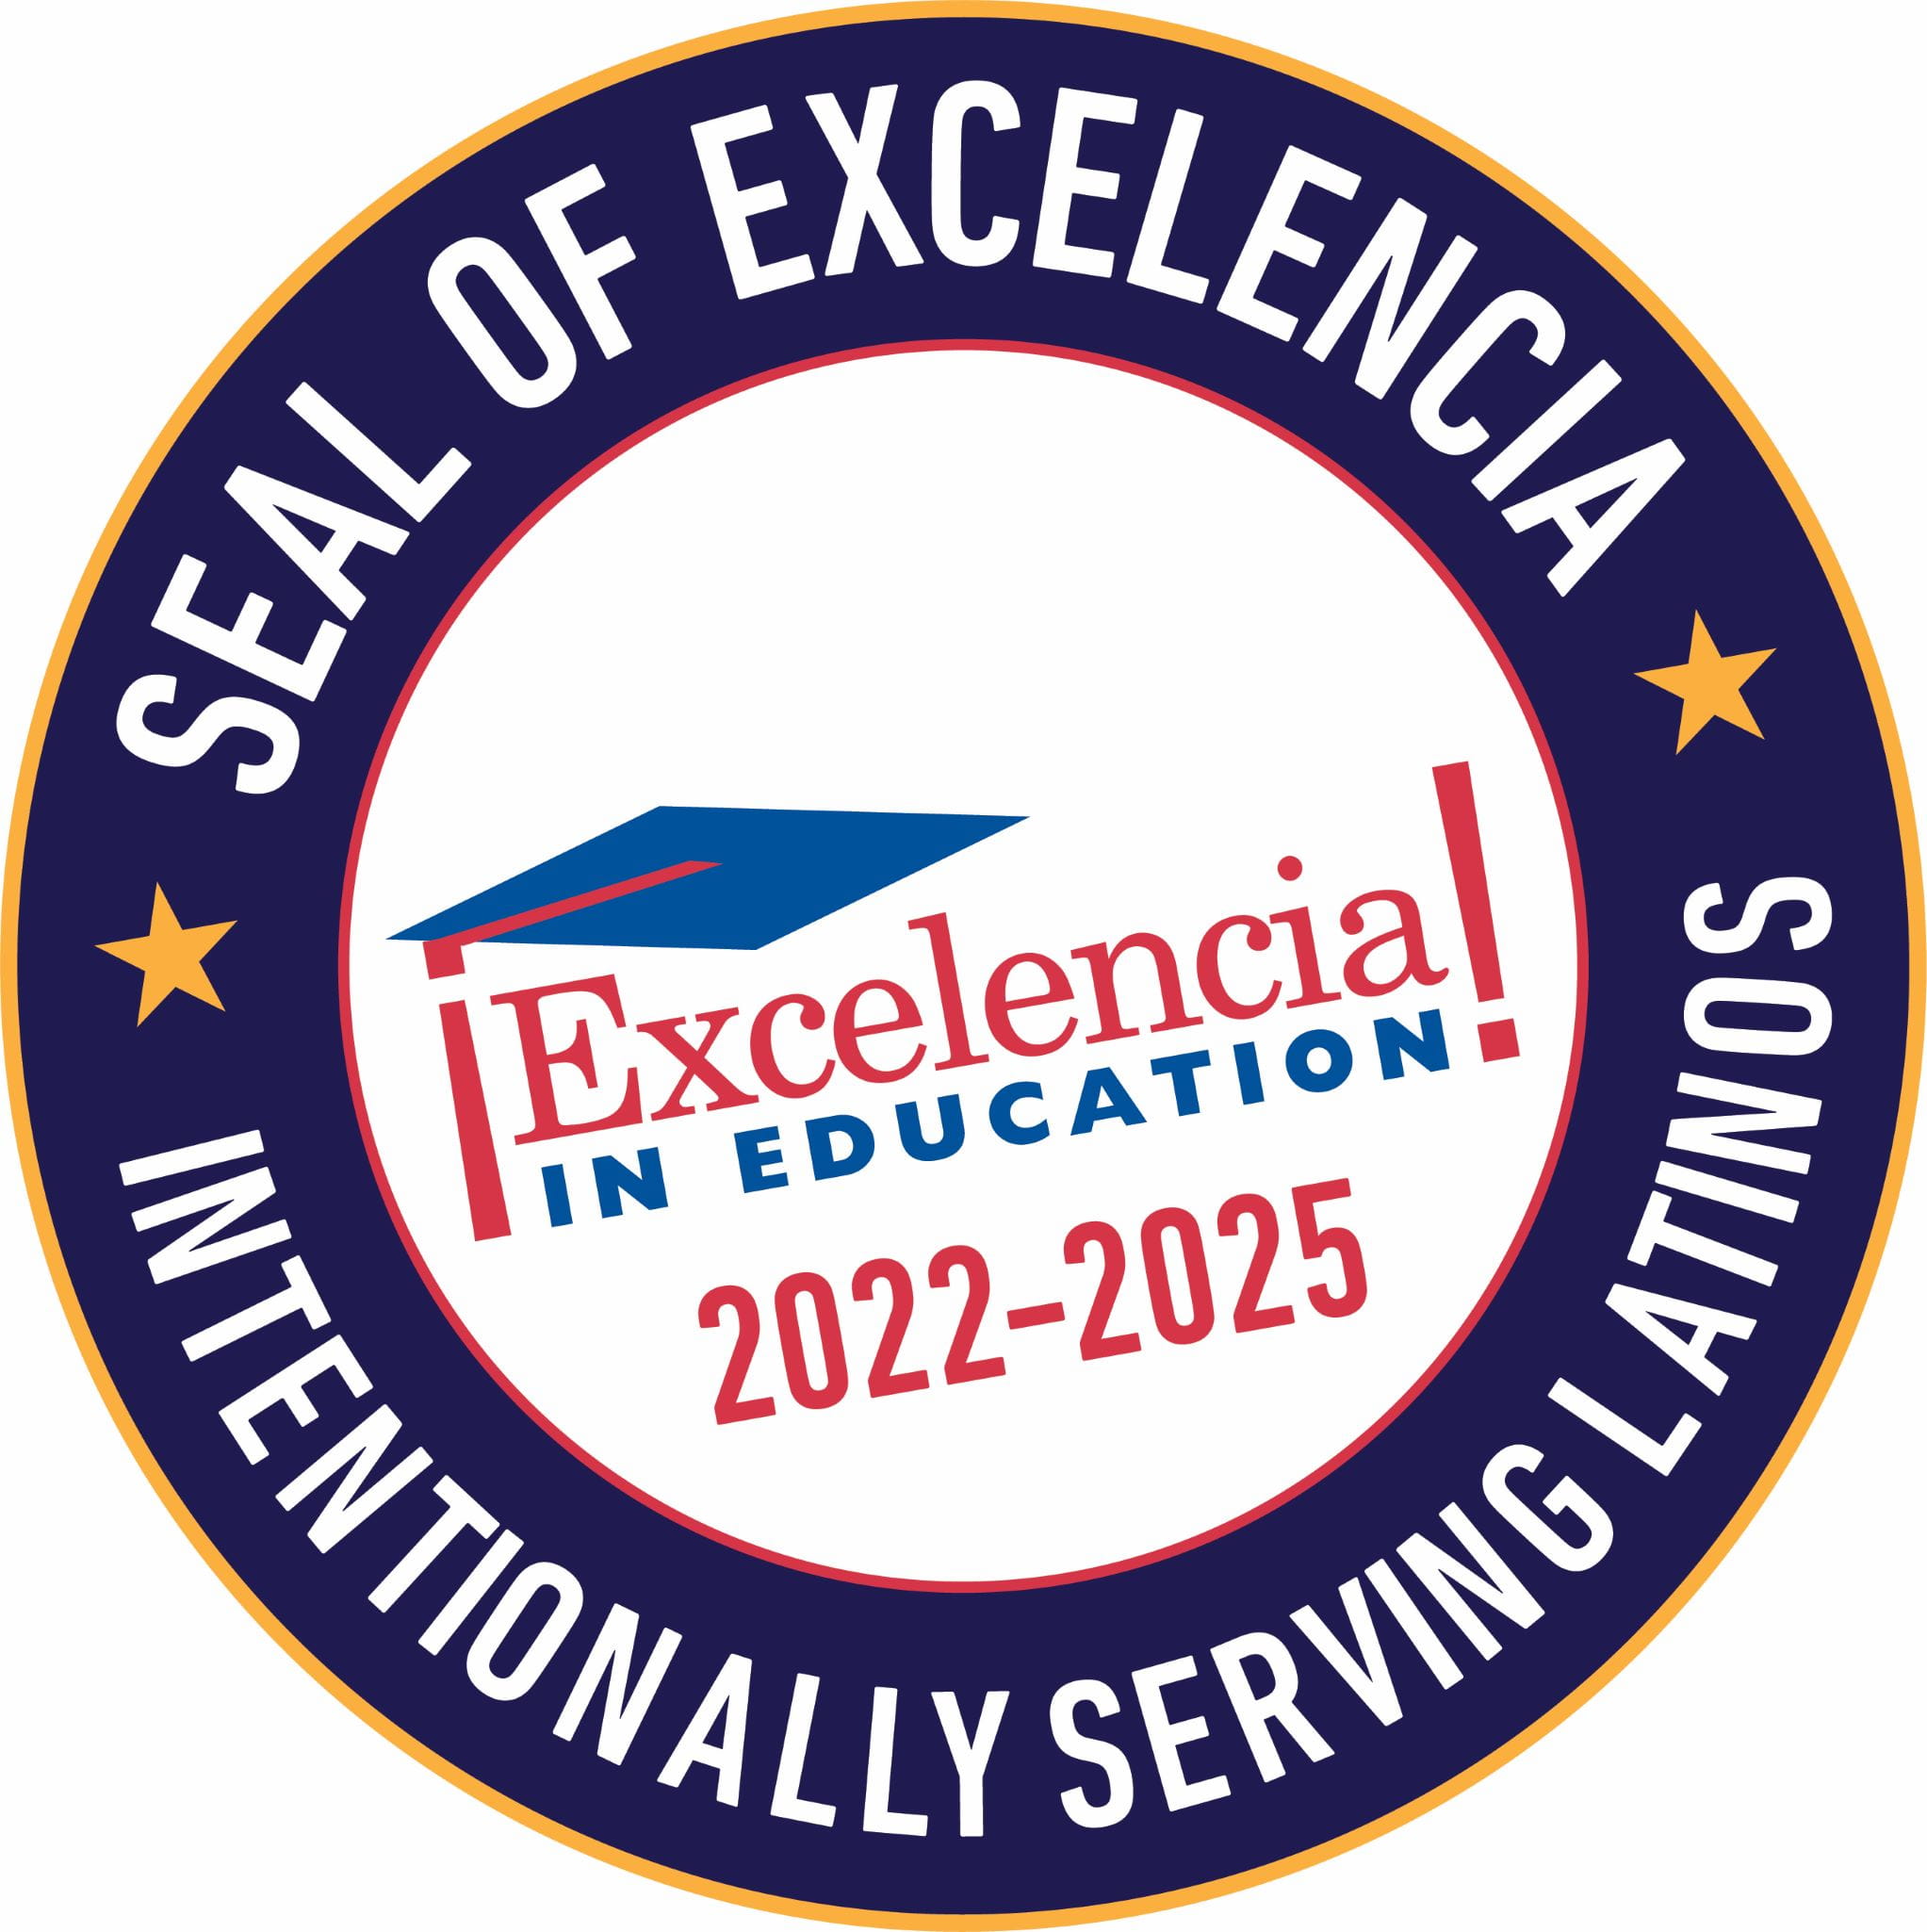 Image of Seal of Excelencia for the years 2022-2025. Seal reads "Seal of Excelencia, Intentionally Serving Latinos."" _languageinserted="true